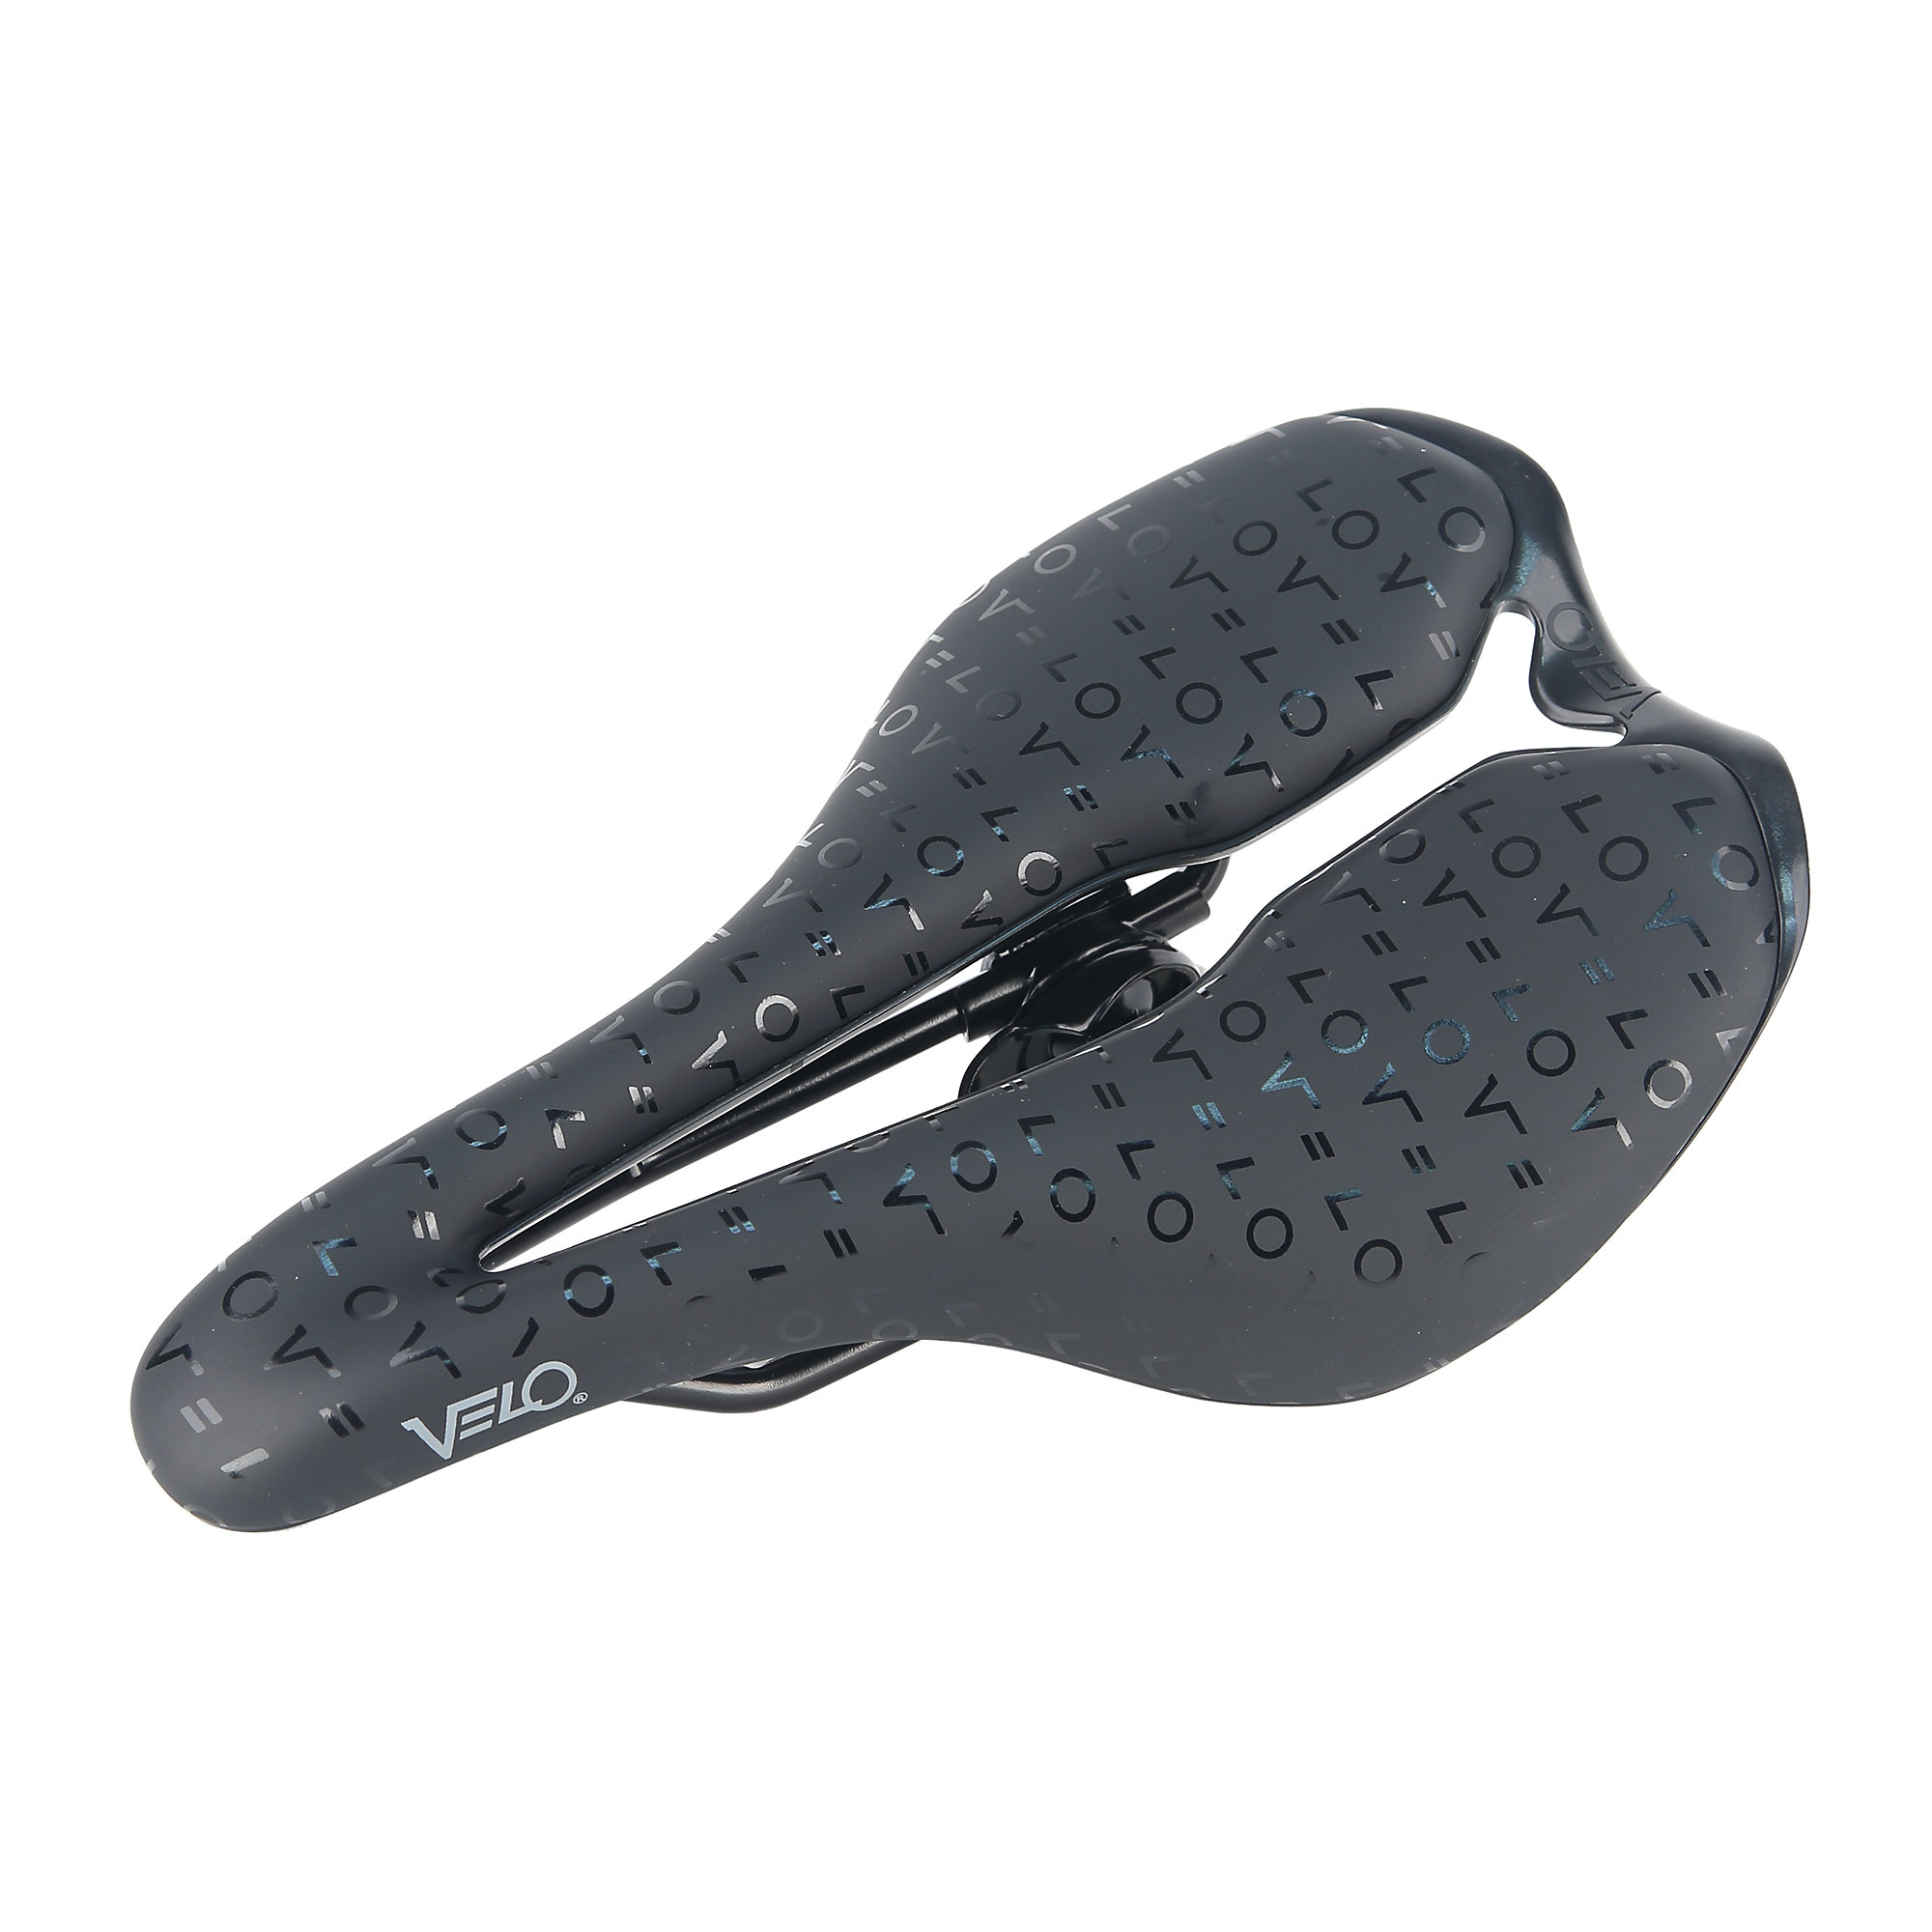 Velo Bike Seat 334169: Elite Saddle for Road & Spin Cycling